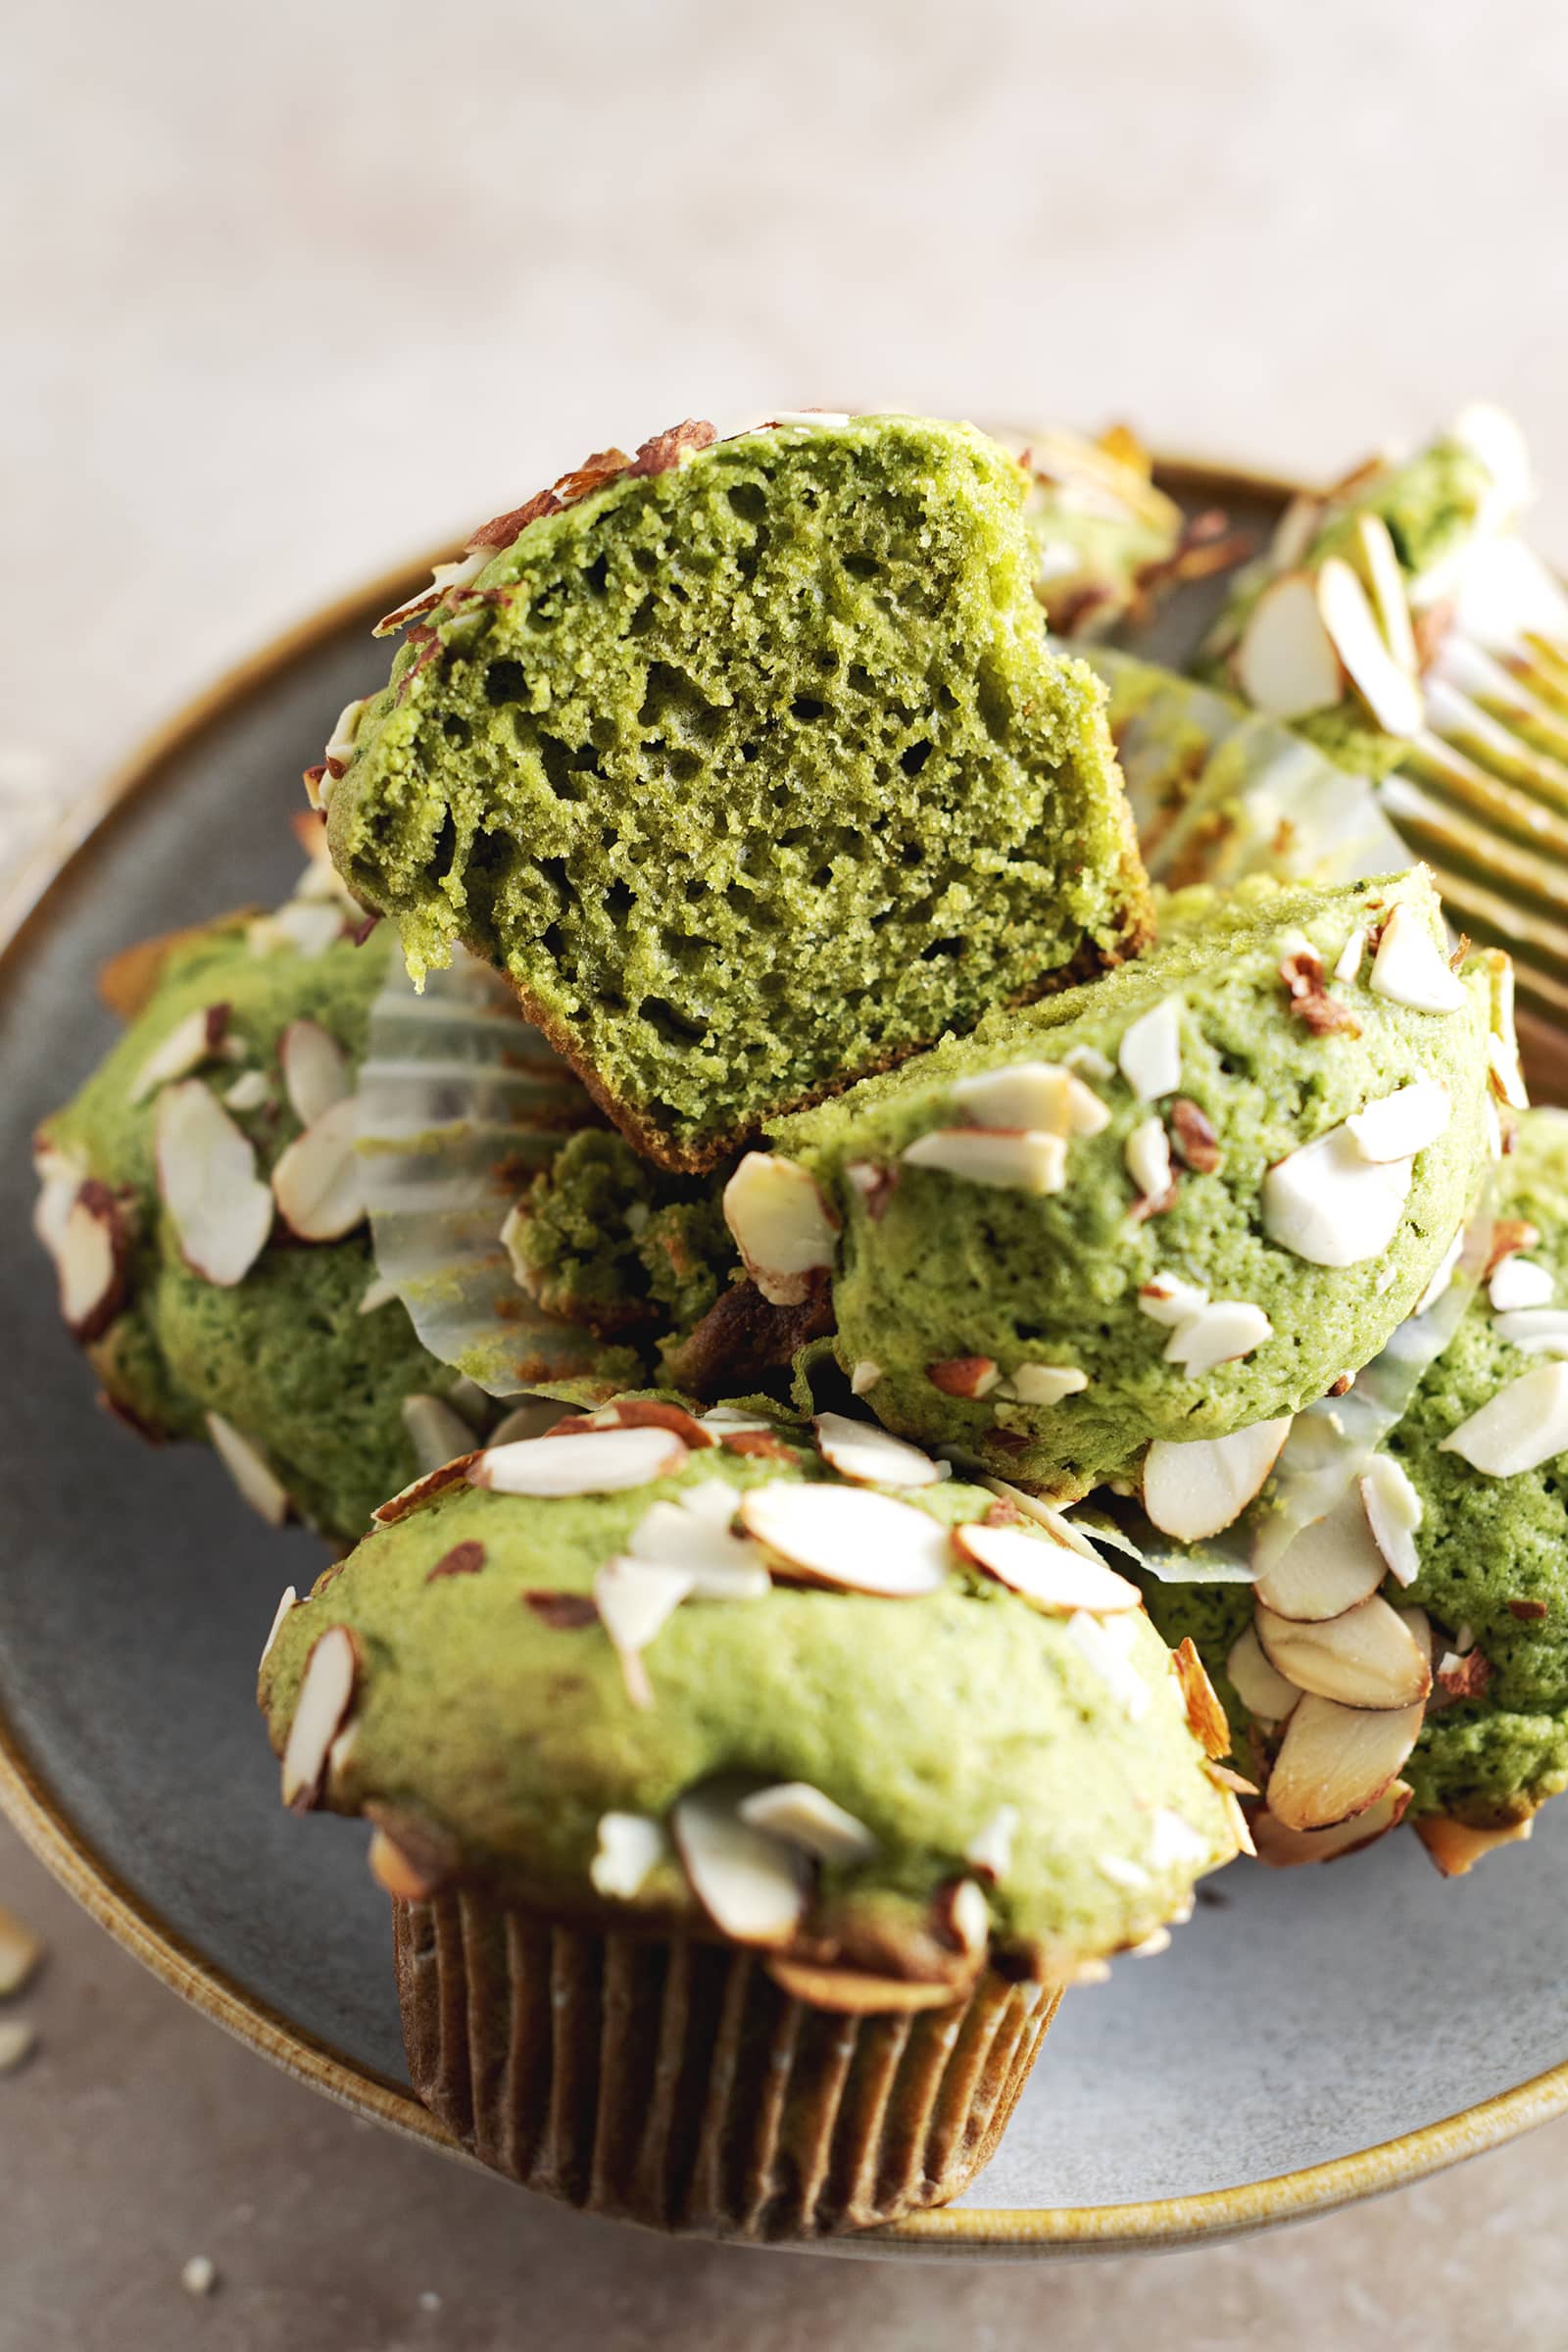 A matcha muffin cut in half to show texture sitting on top of pile of muffins.